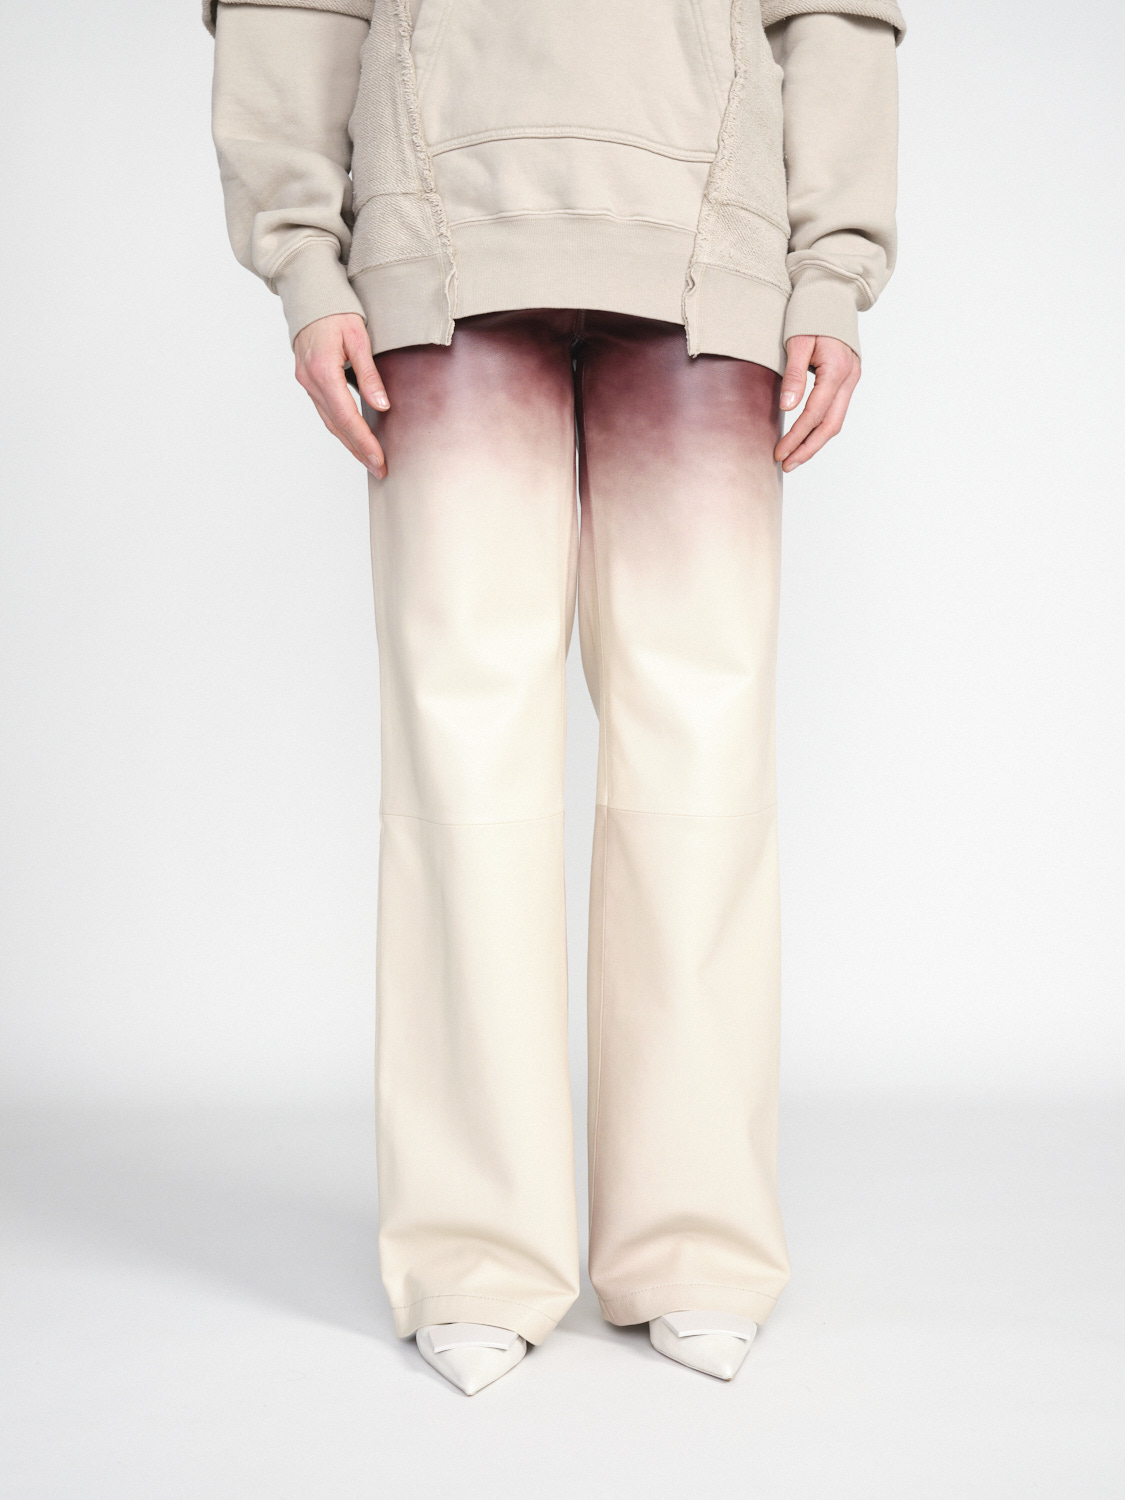 Arma Galizia – leather trousers with degradé effect  brown 38